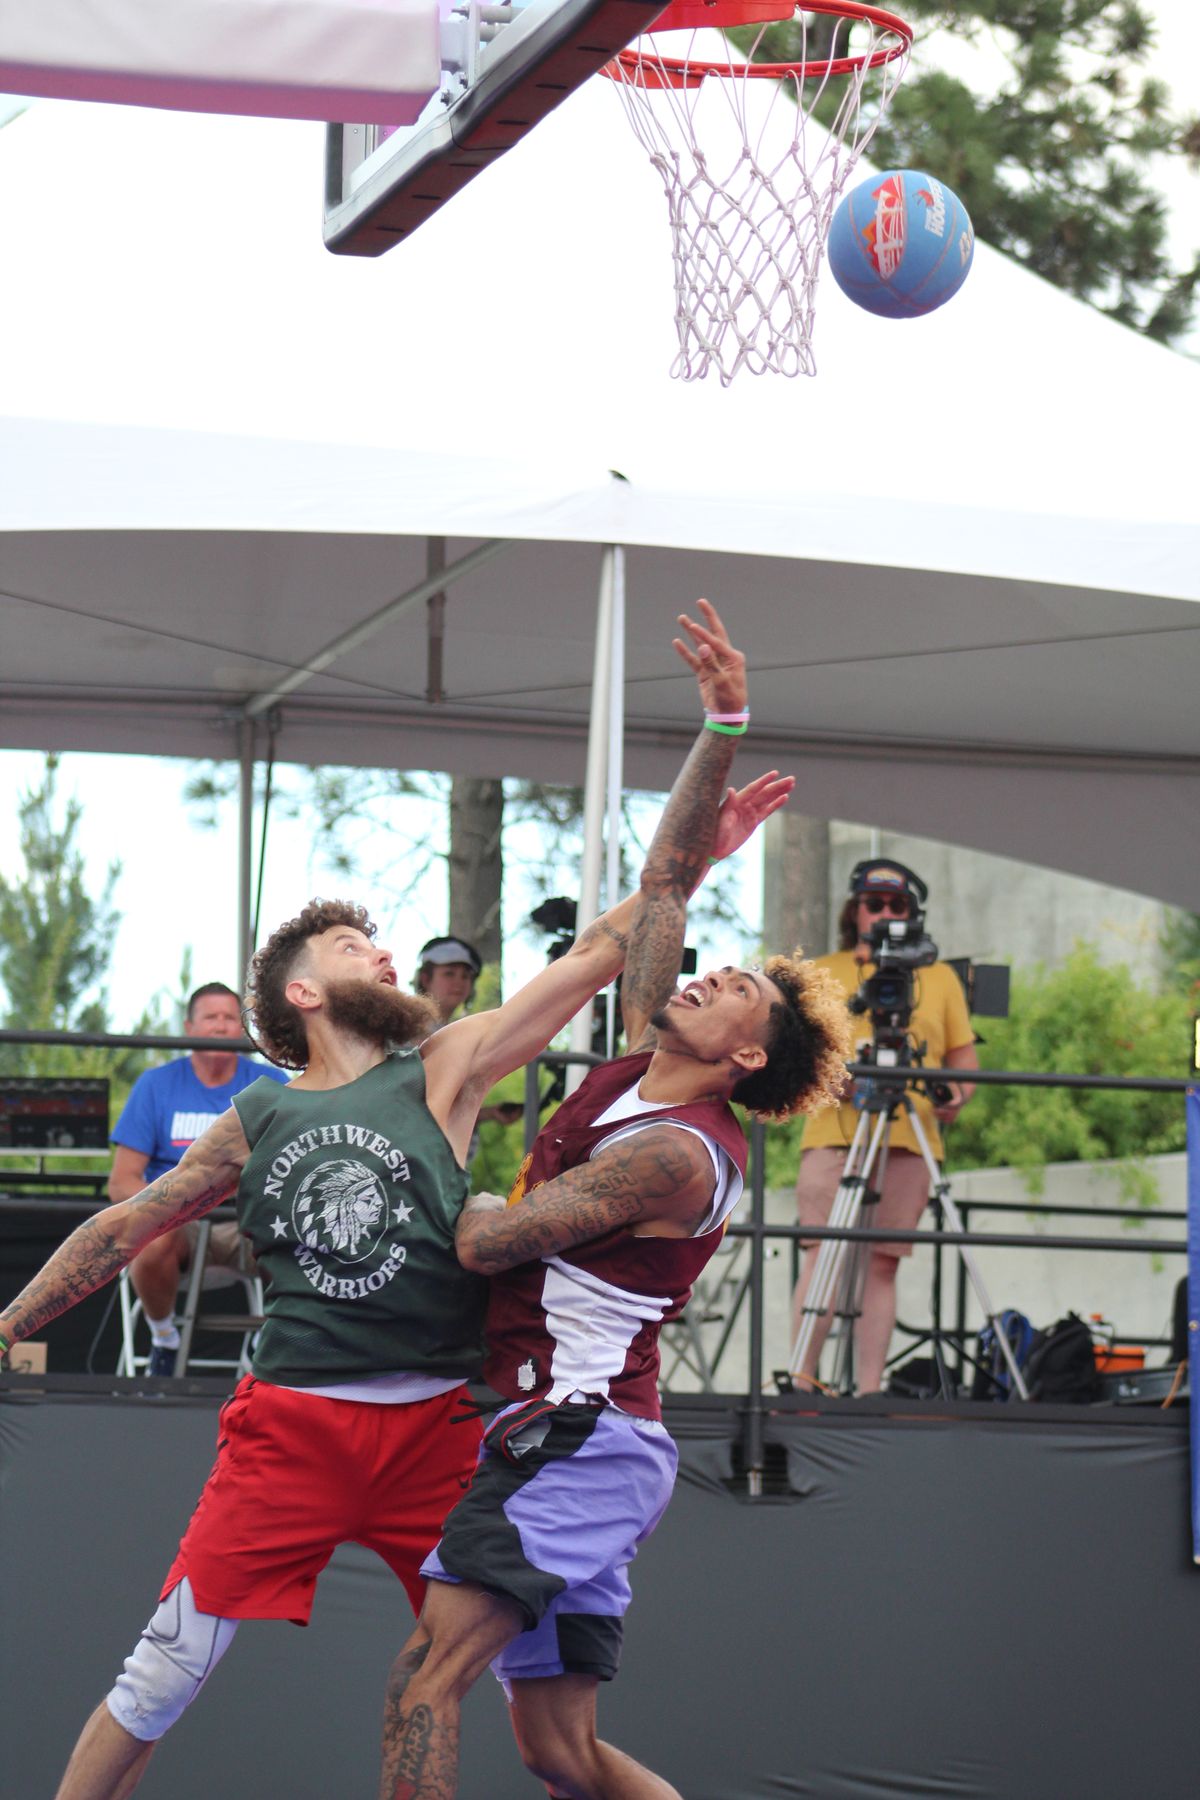 Ahbrae Harvey of the NW Warriors Elite (left) and Markieth Brown (of team Amotkan (right) contend for the ball during the Six Feet and Under championship game during Hoopfest on Sunday June 25, 2023.  (Jordan Tolley-Turner/For The Spokesman-Review)